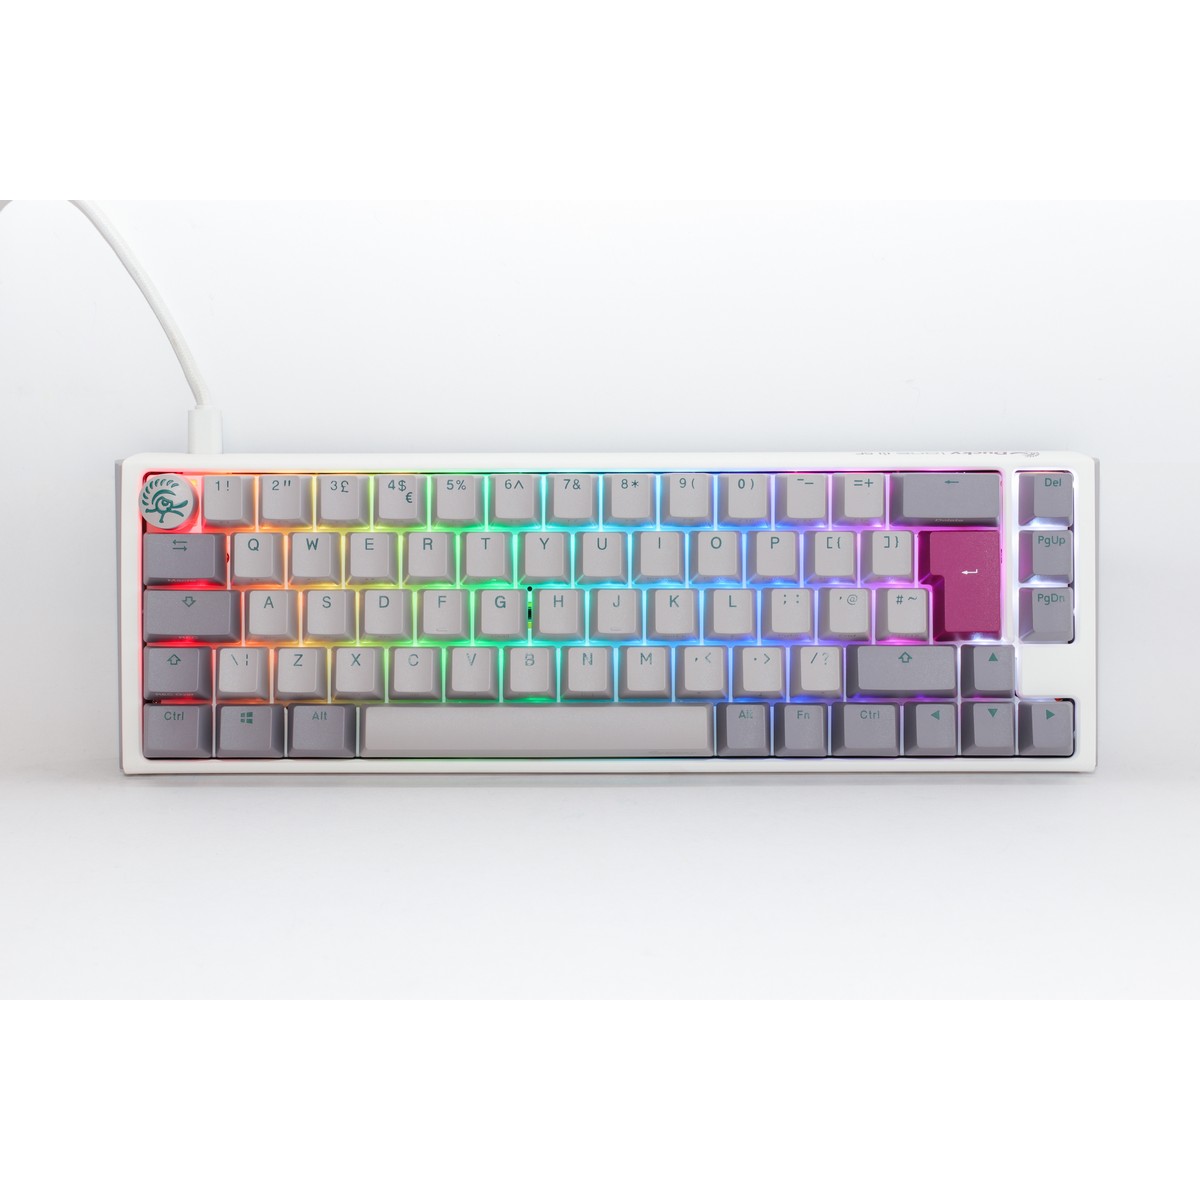 Ducky - Ducky One 3 Mist SF 65% USB RGB Mechanical Gaming Keyboard Cherry MX Brown Switch - UK Layout